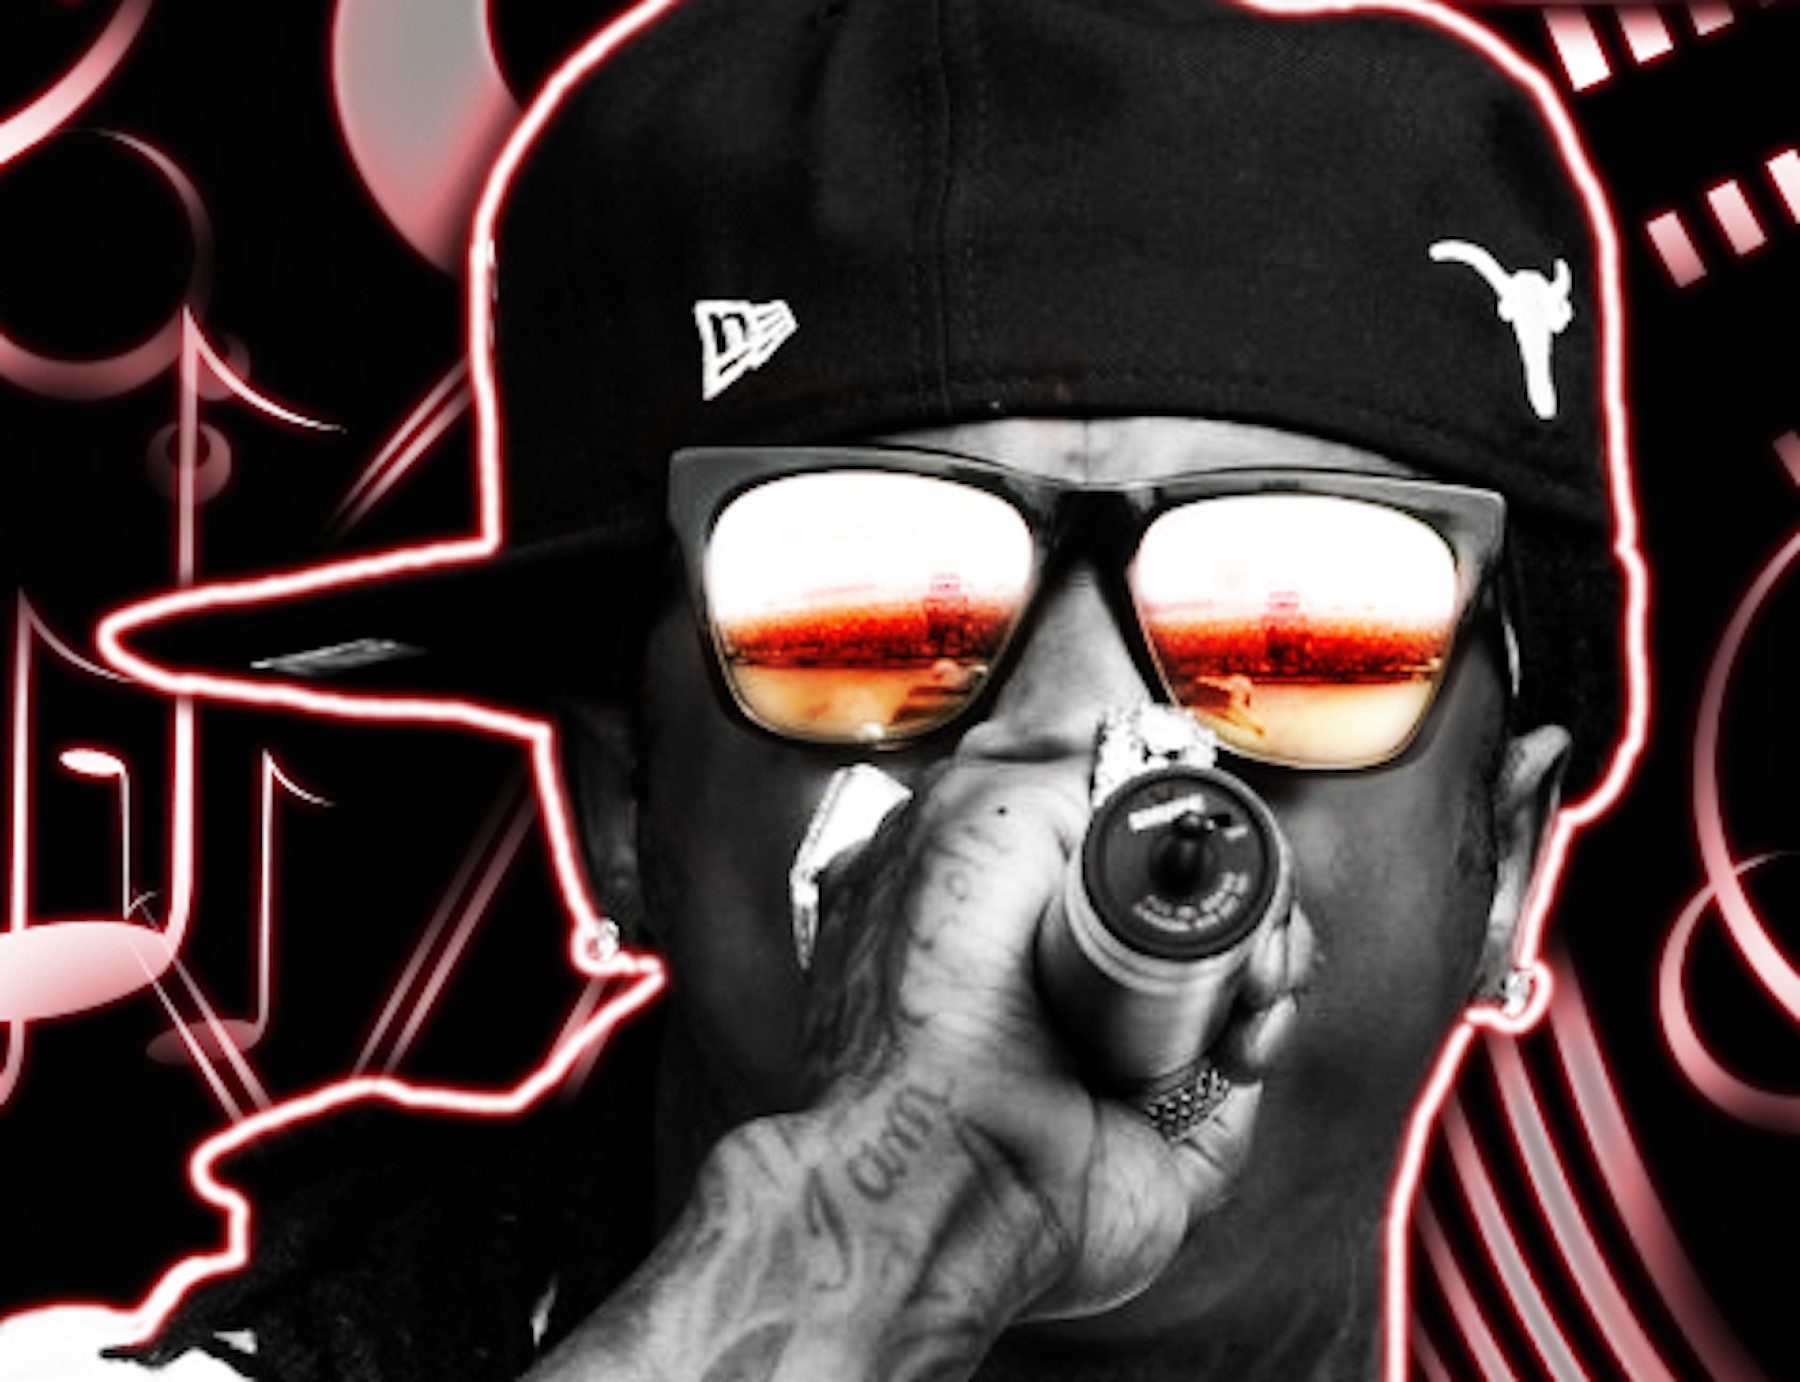 Complete Lil Wayne Discography (Mixtapes, Albums, Singles, and Features) And Weed